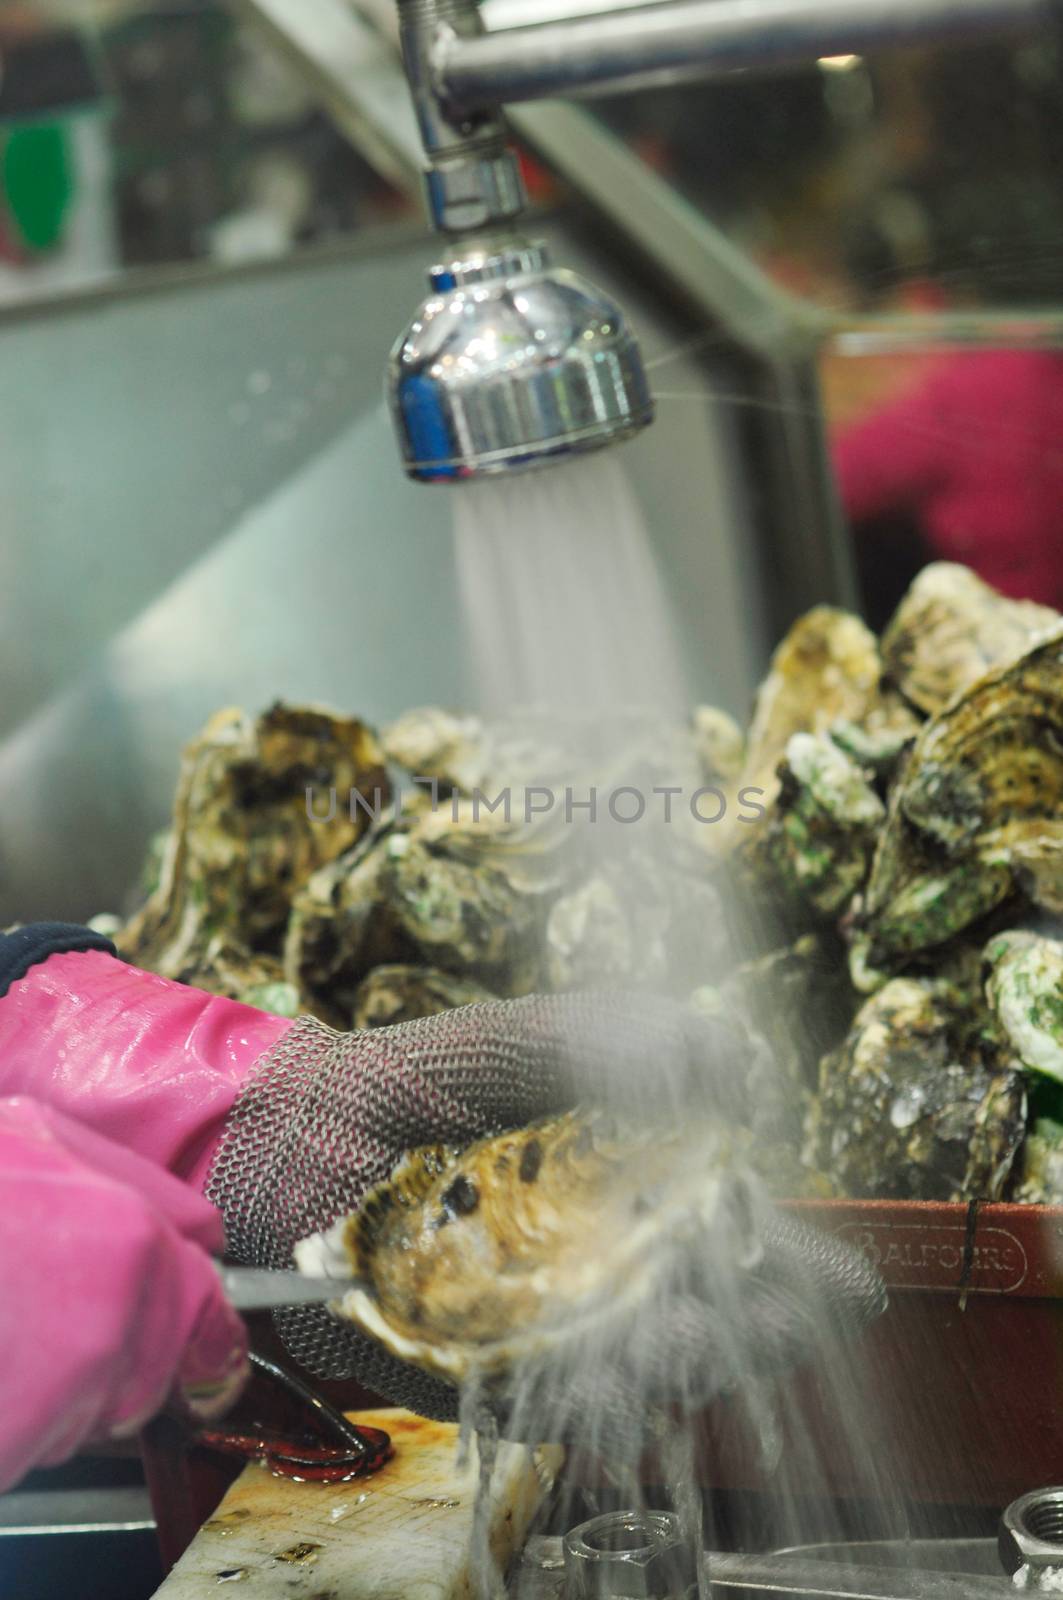 Pacific Oysters Grande cleaning before cooking at fish market in Sydney, New South Wales, Australia 